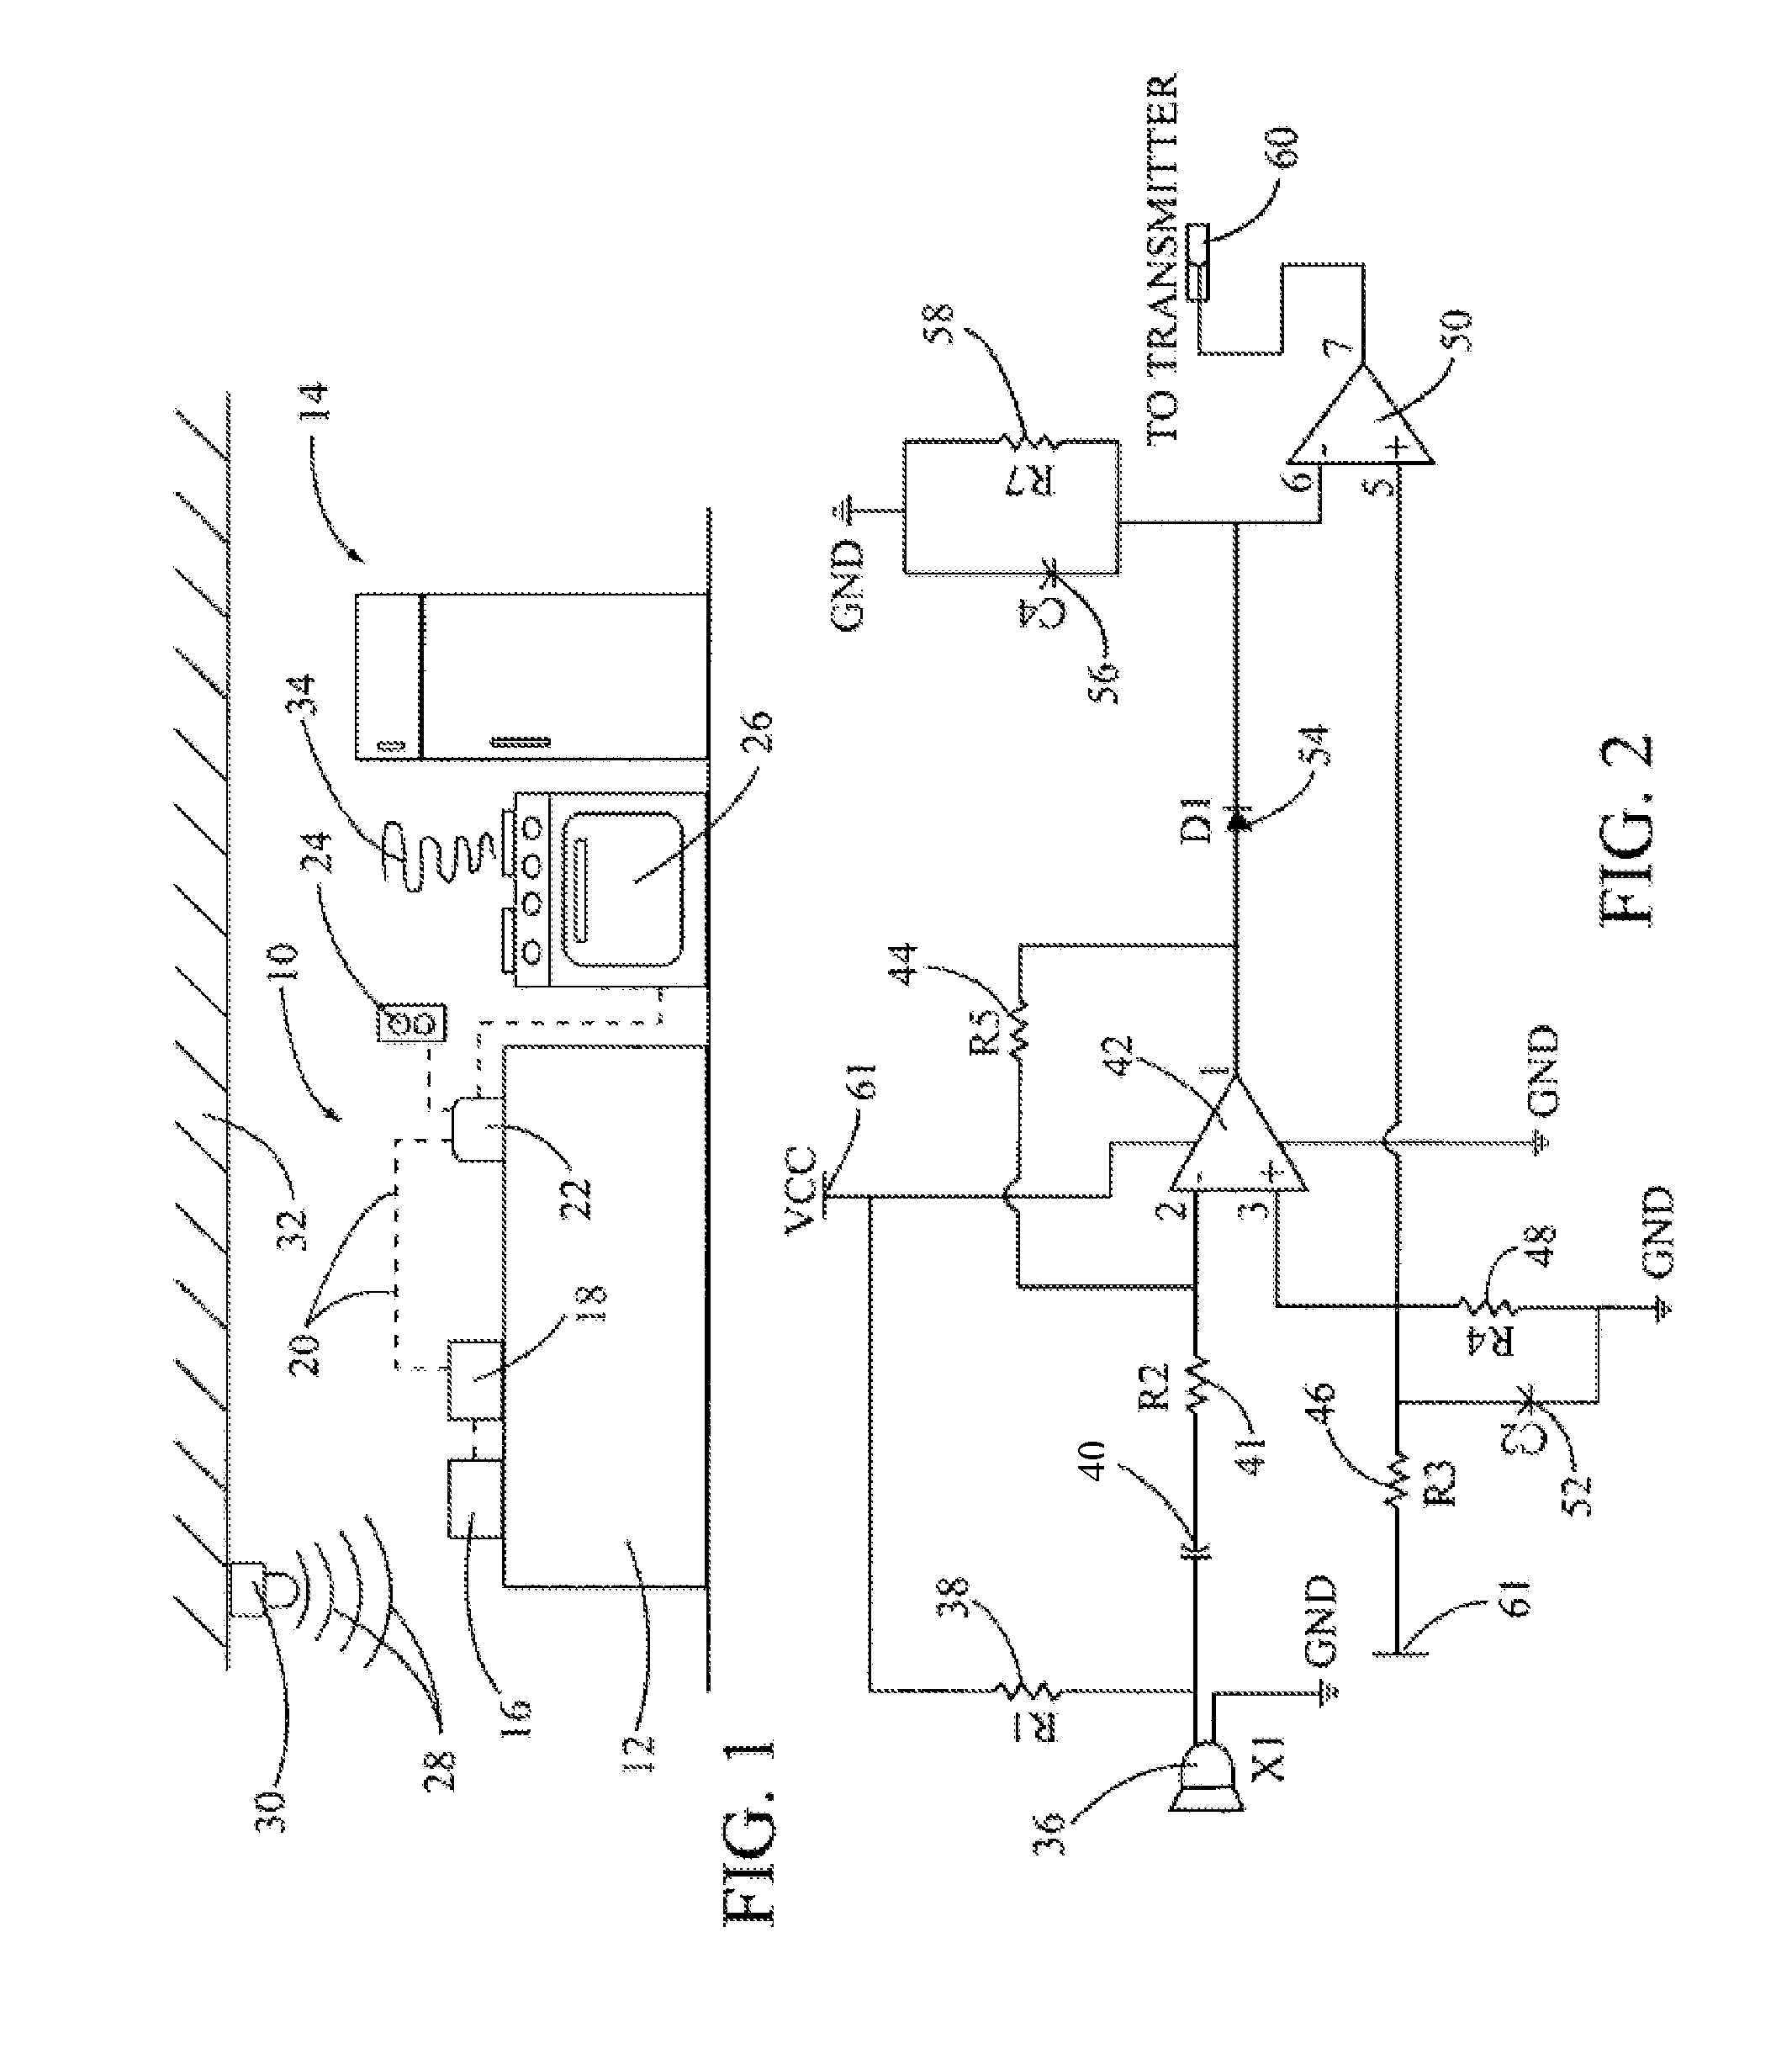 Digital electronic system for automatic shut off and turn on of electrical and gas operated appliances